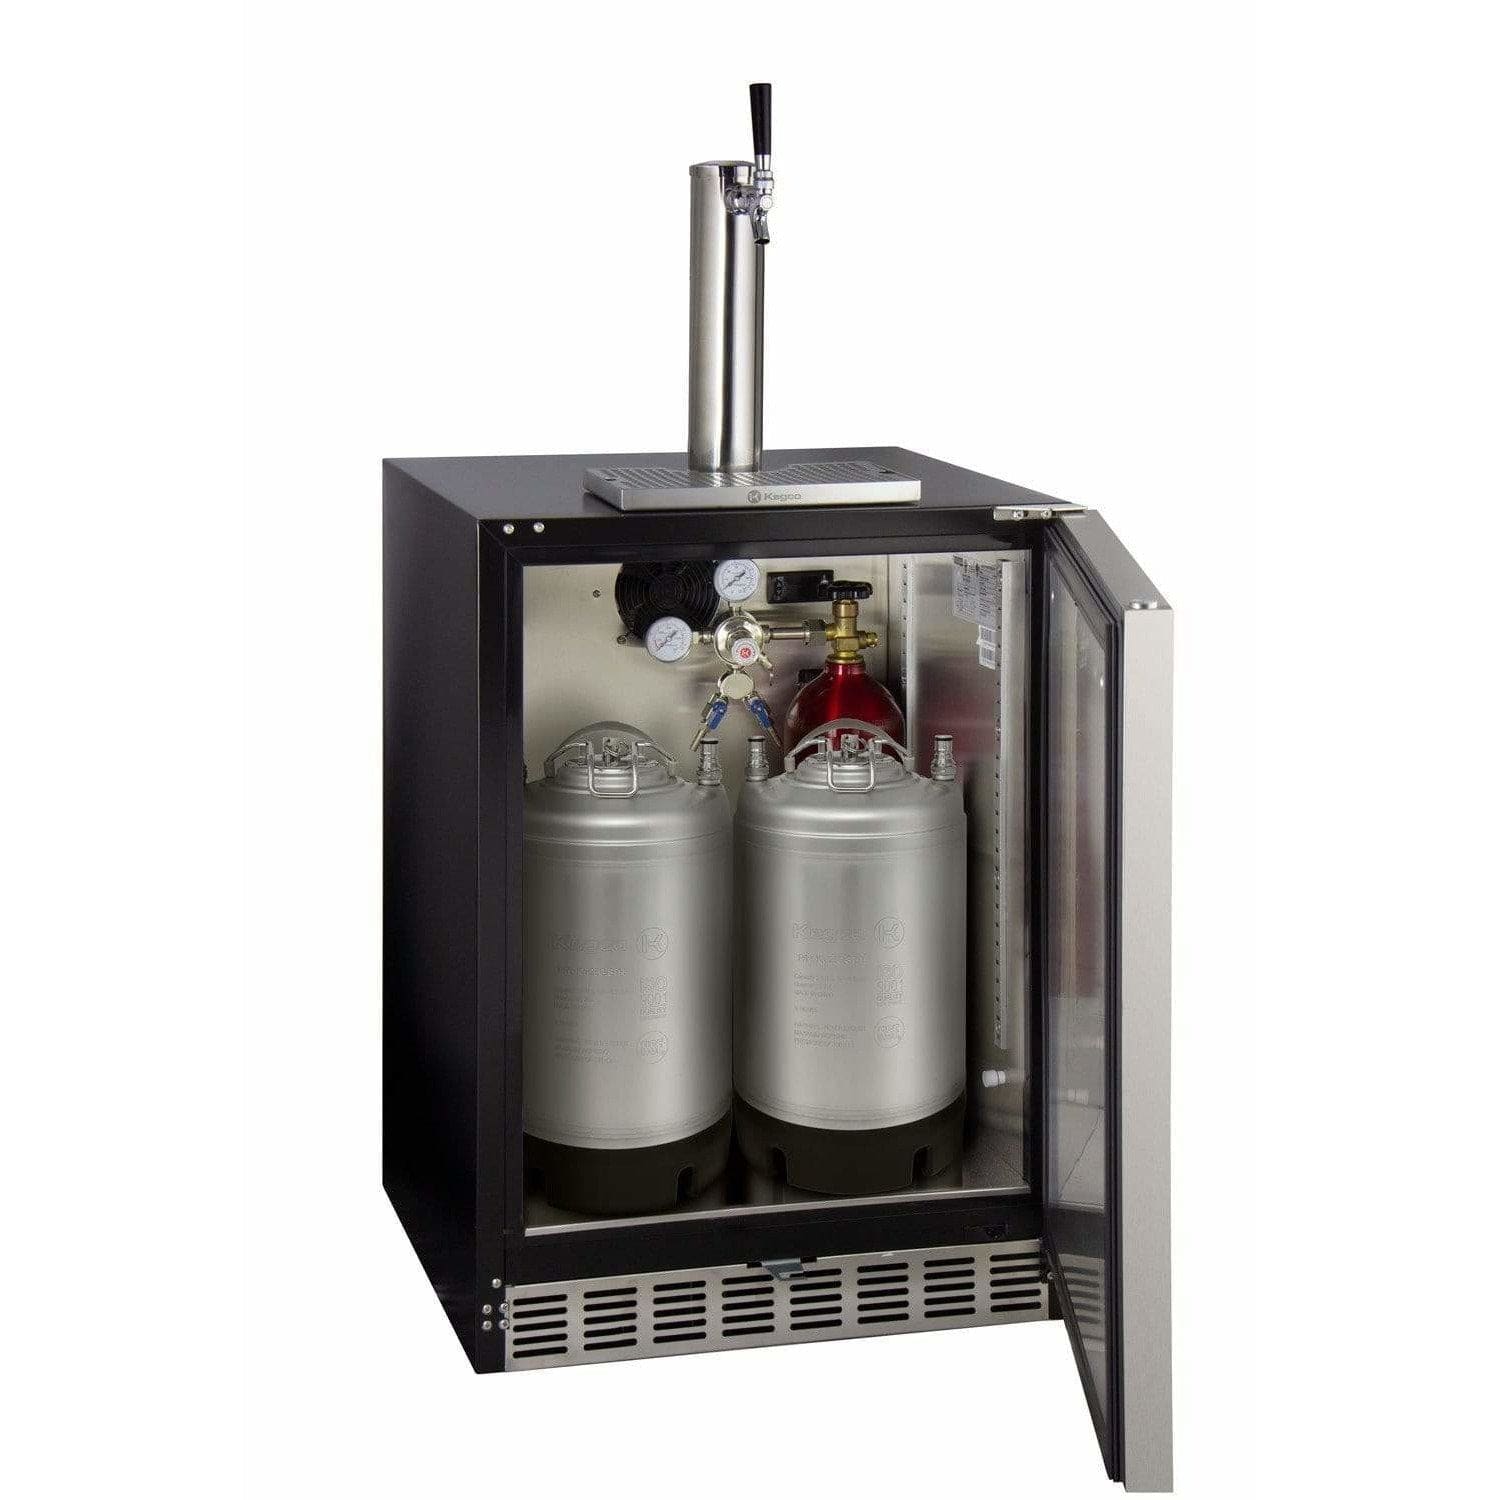 Kegco 24" Wide Single Tap Stainless Steel Built-In Right Hinge ADA  with Kit Kegerator HK48BSA-1 Wine Coolers Empire